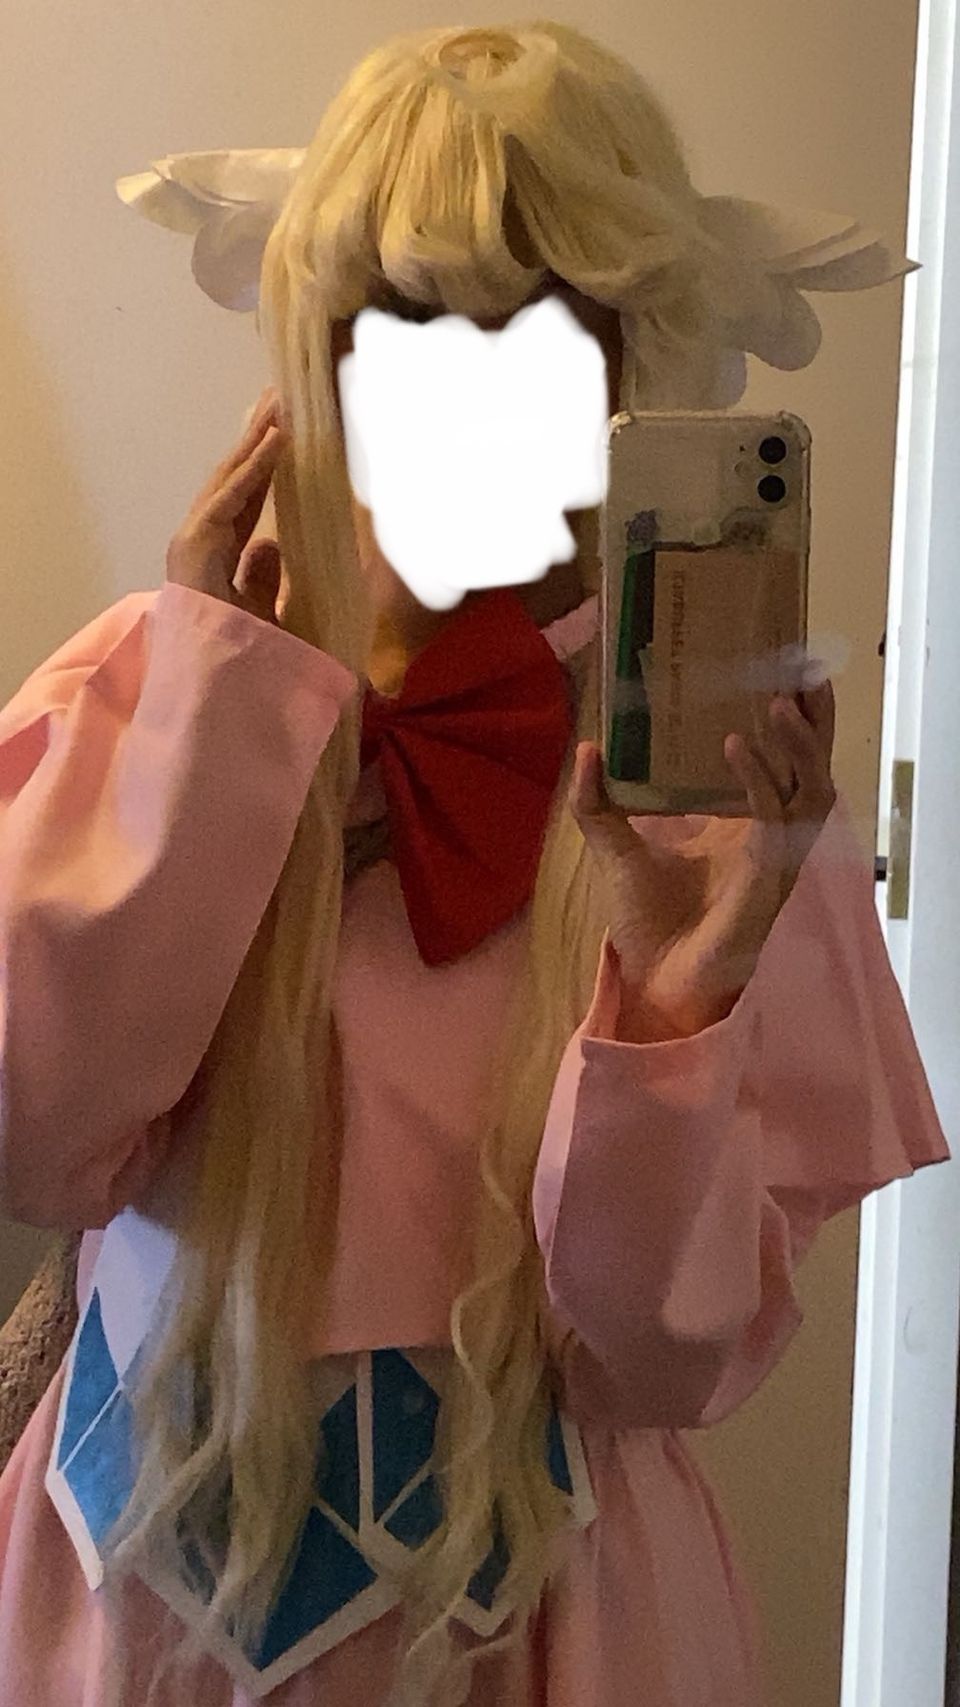 95cm blonde wig for cosplay